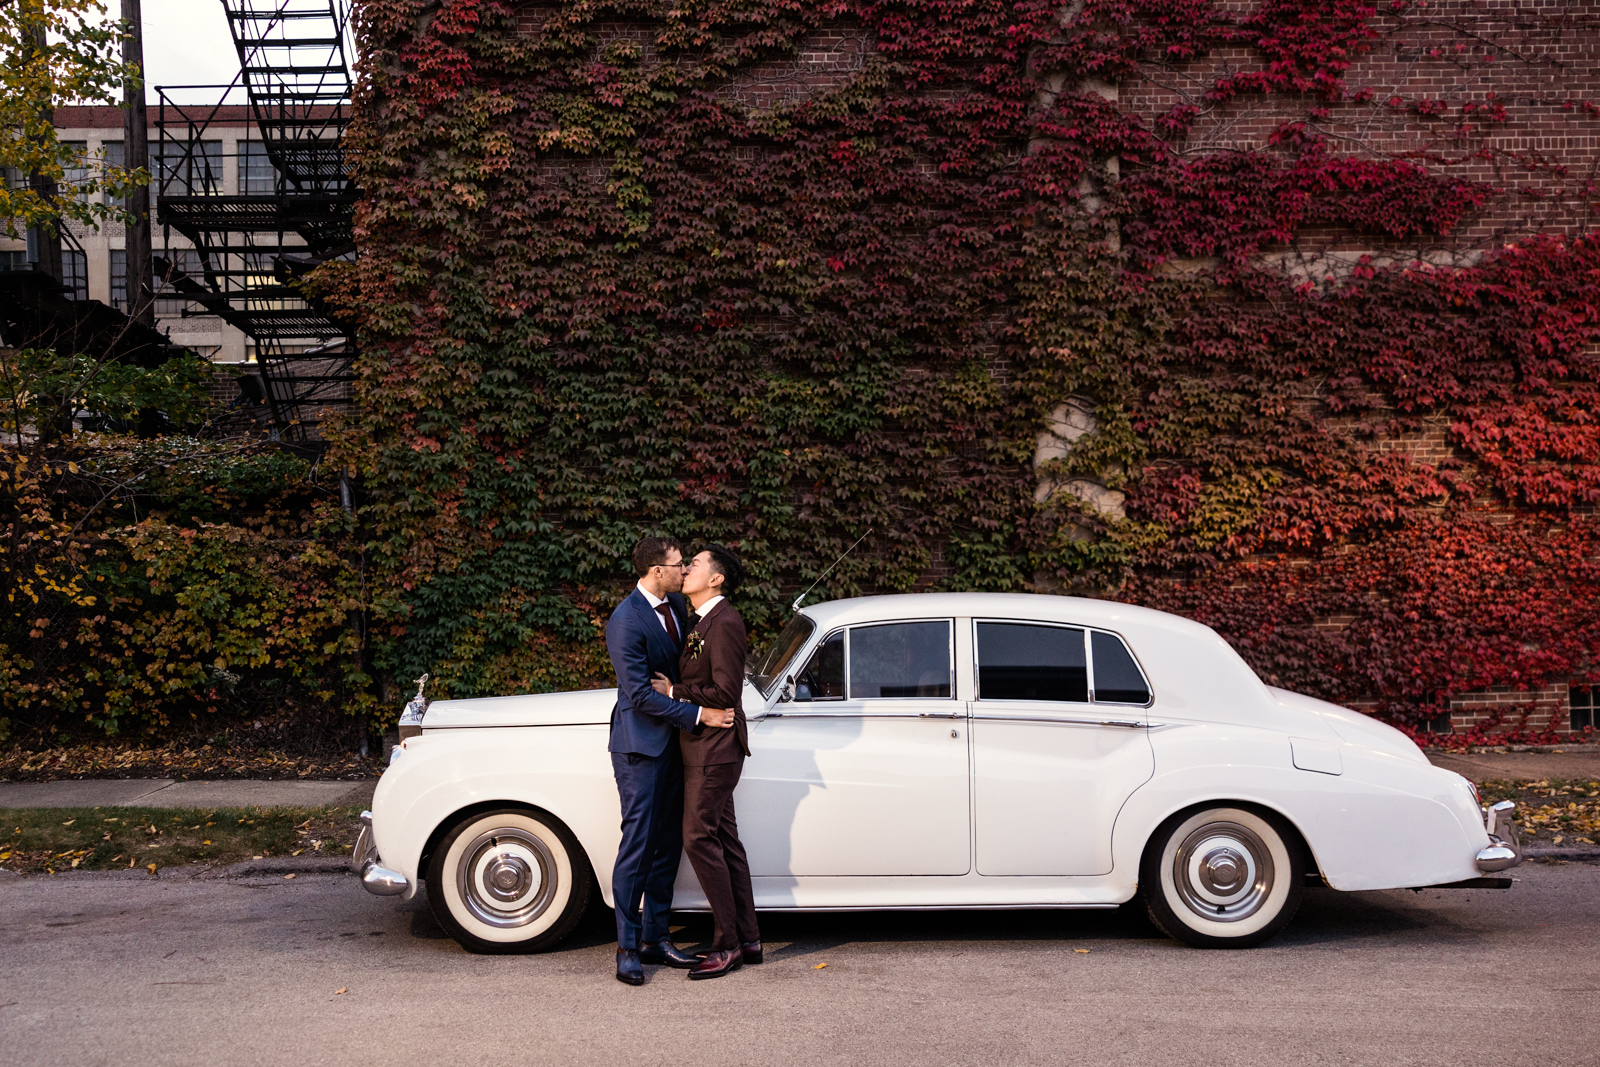 Groom and groom kissing with fall foliage in front of Rolls Royce by documentary wedding photographer Emma Mullins Photography